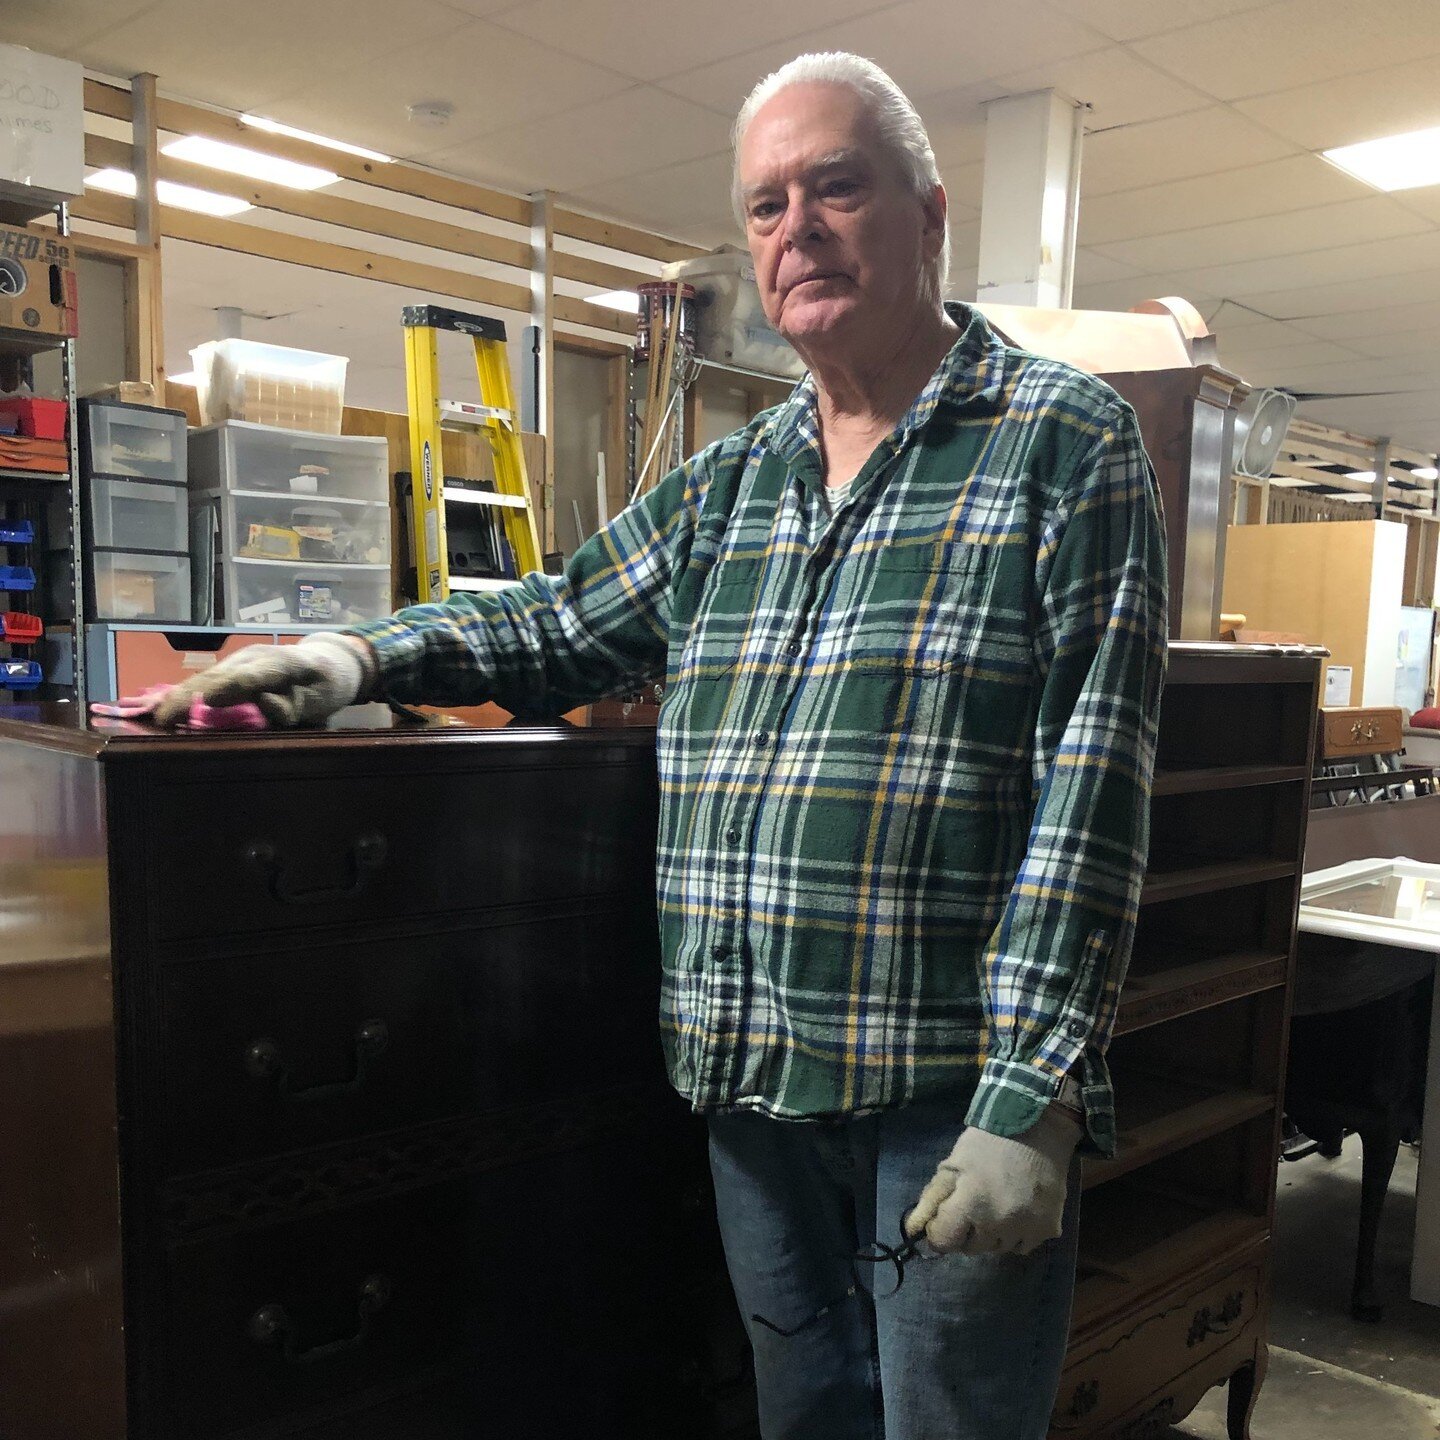 Did you know our volunteers are crucial for keeping our store up and running? Paul has been a long term volunteer with us repairing the furniture we get in at the store, especially the wooden furniture. 

Paul began developing his woodworking skills 